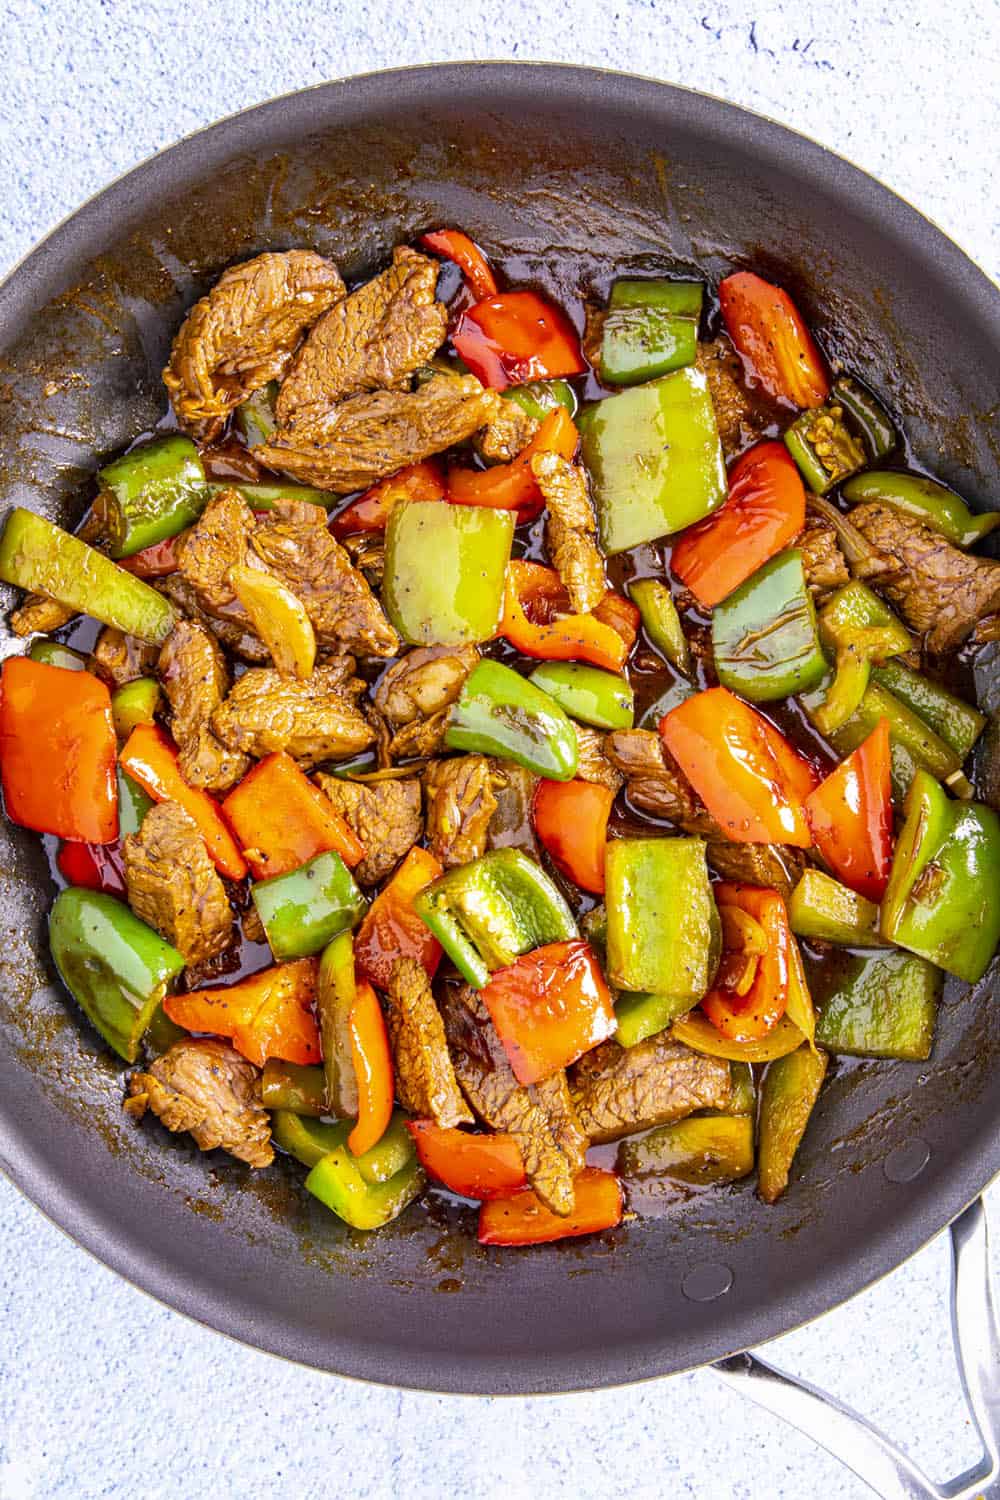 Combining the steak with peppers and sauce in a hot pan